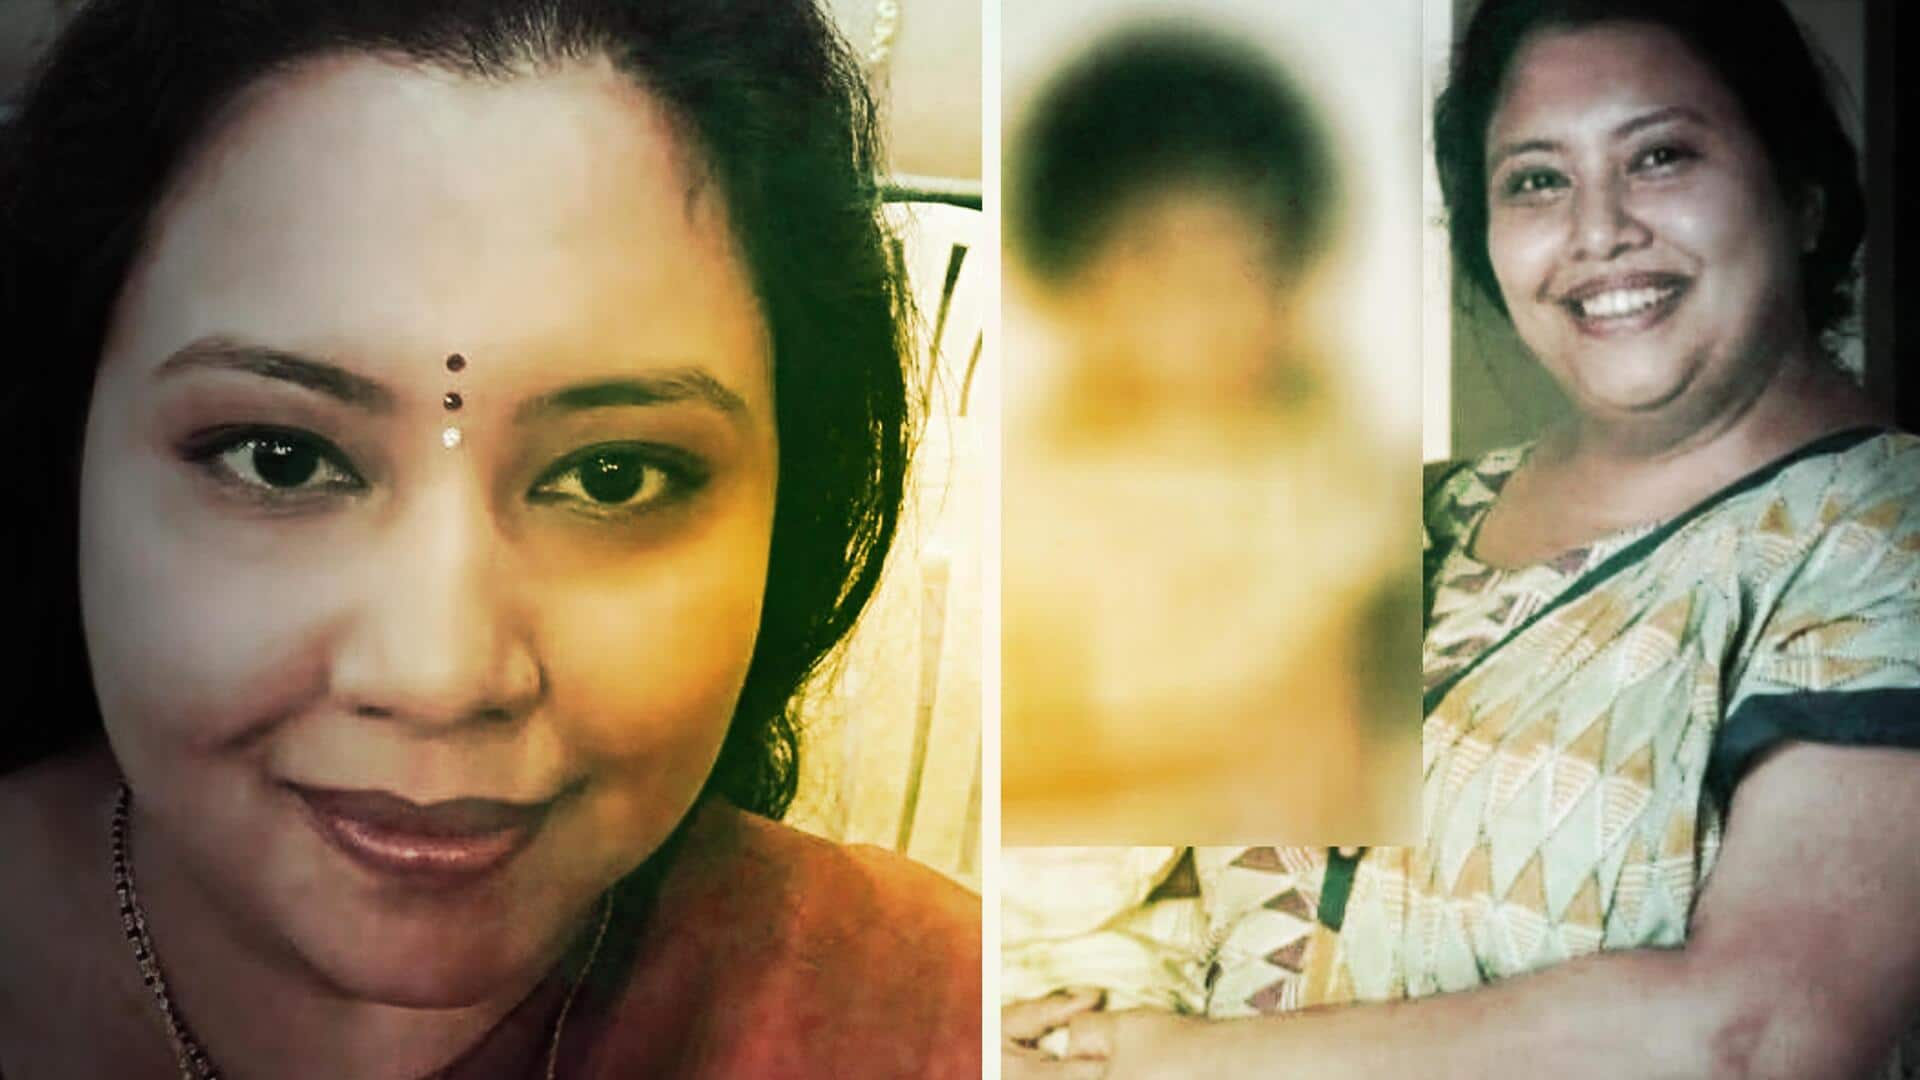 Murder-accused Bengaluru CEO previously filed domestic violence charges against husband